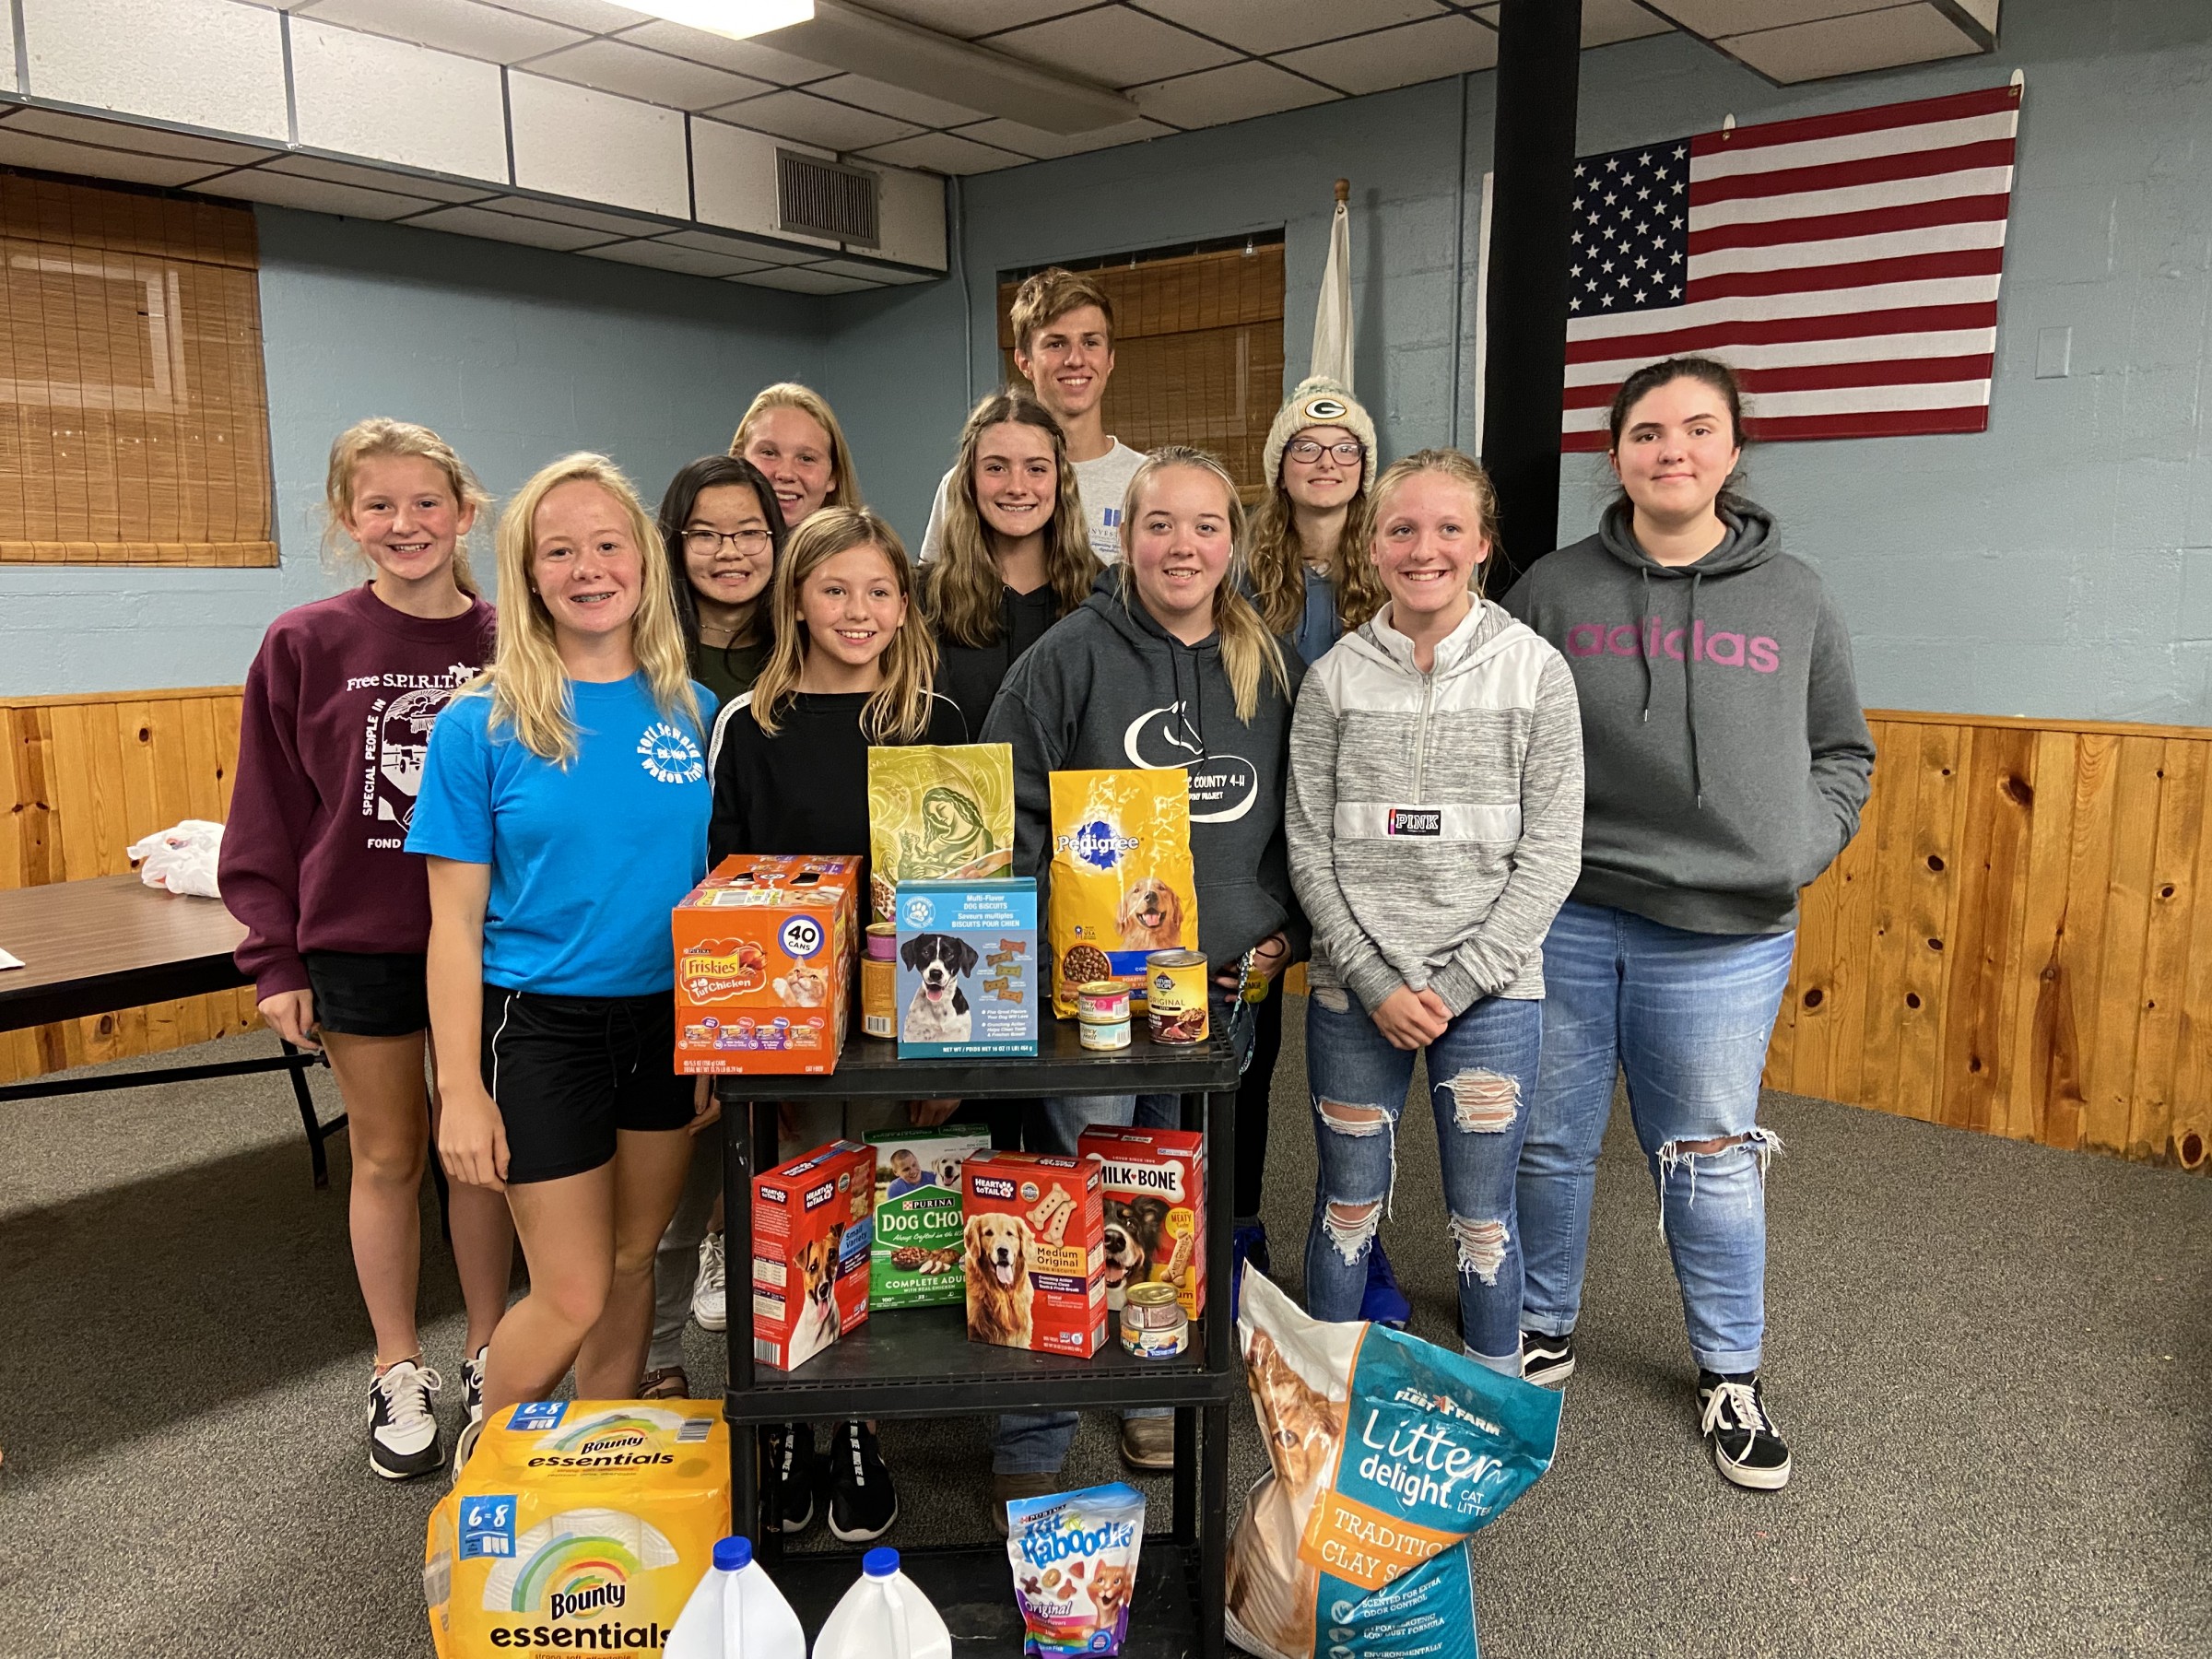 Horse and pony project members collected items for the Humane Society - dog food, cat food, cat litter, bleach, and paper towels.